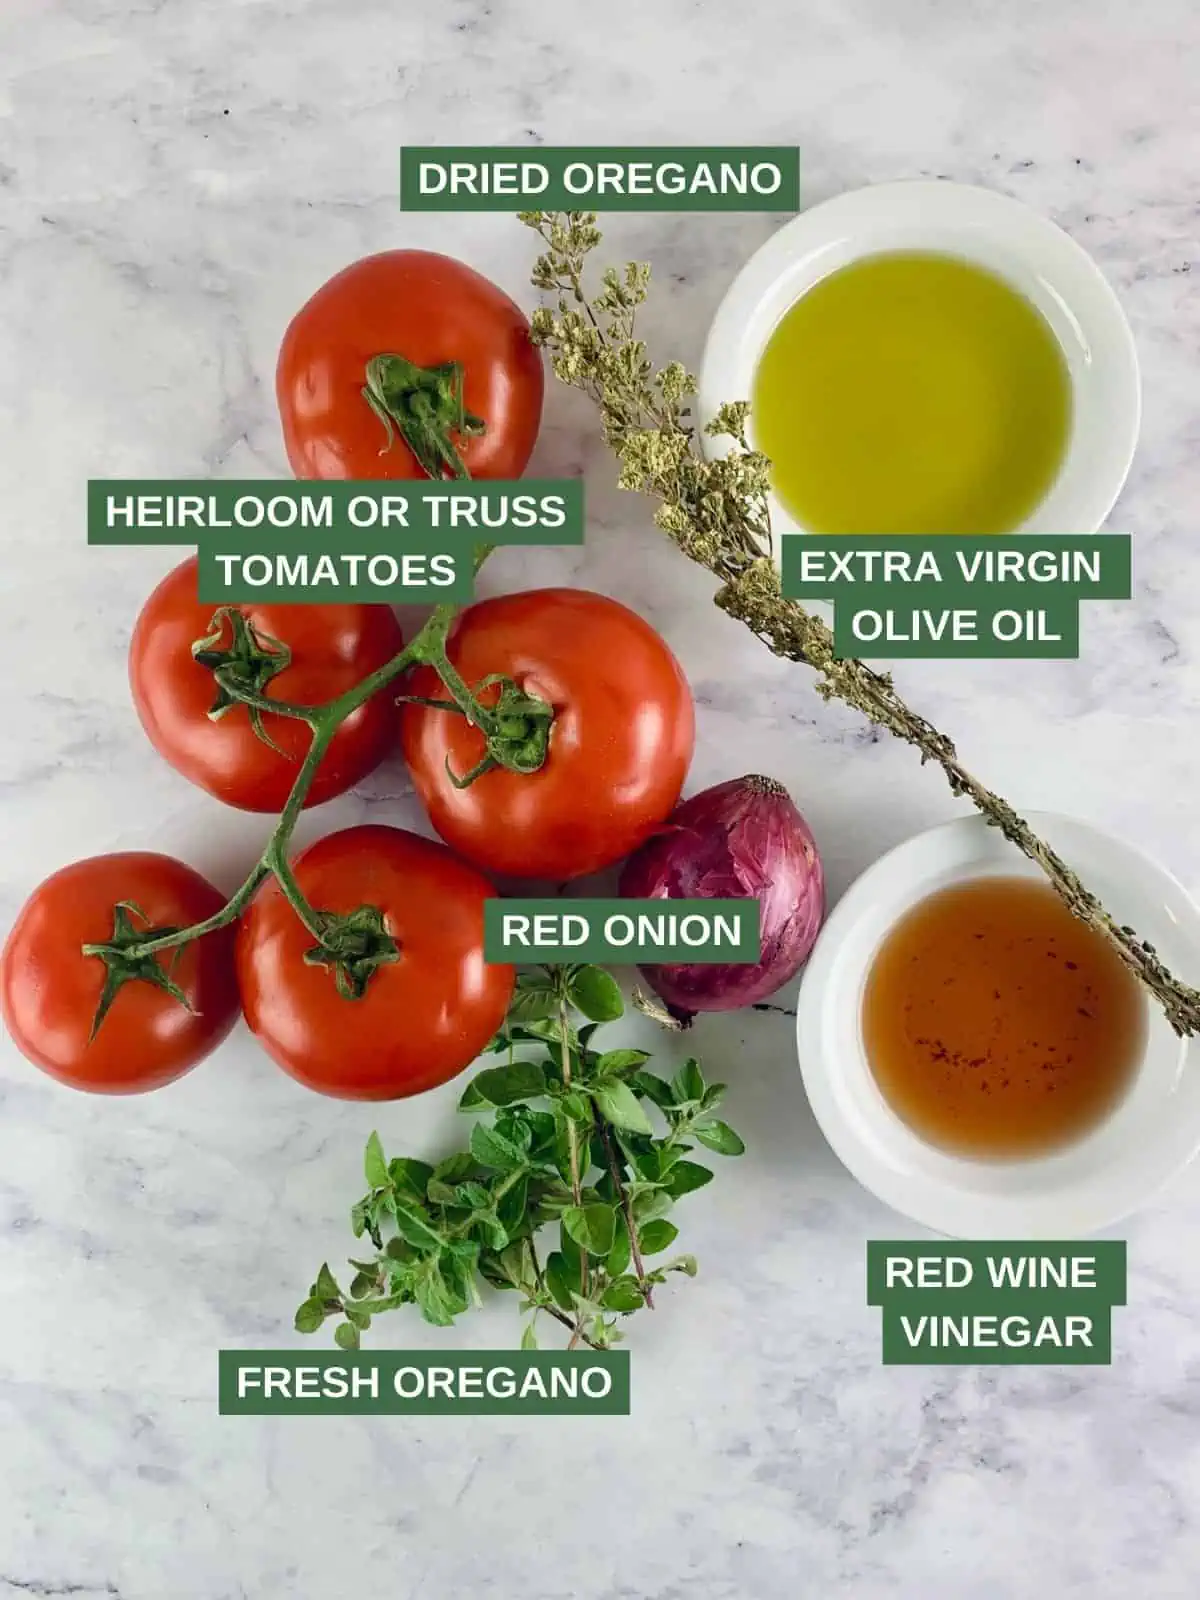 Labelled ingredients needed to make a tomato salad with oregano.